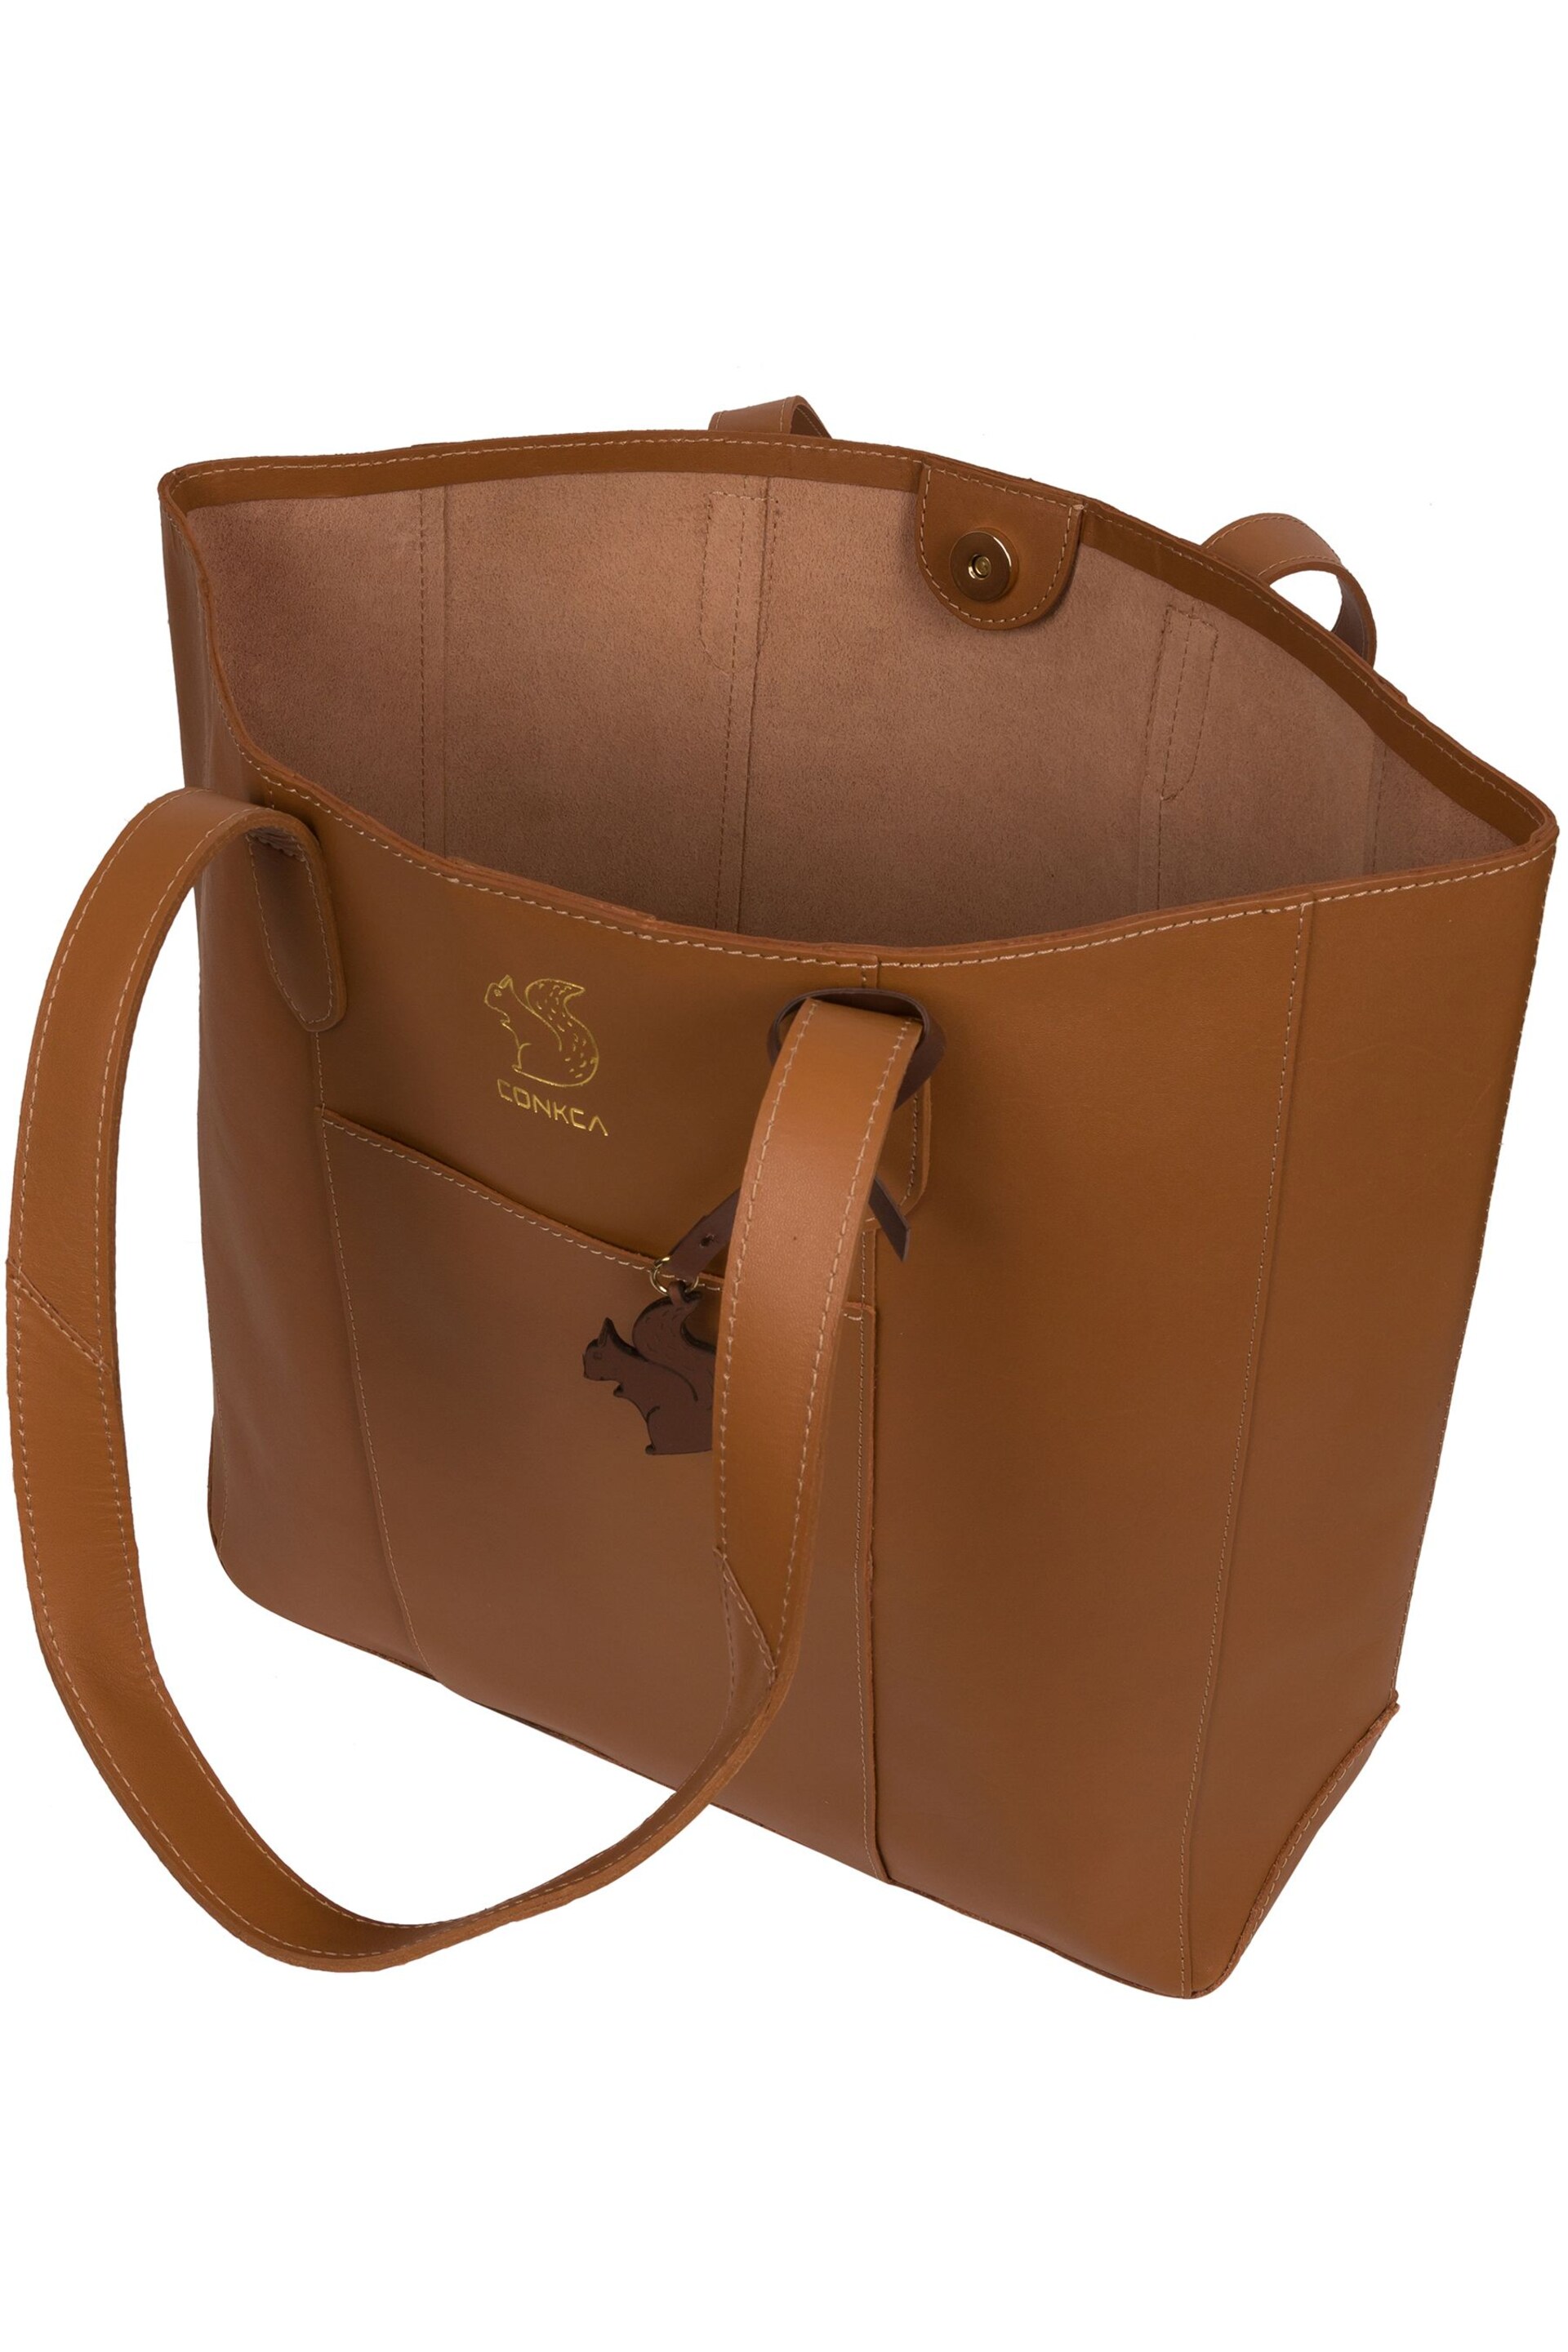 Conkca Hardy Vegetable-Tanned Leather Shopper Bag - Image 4 of 5